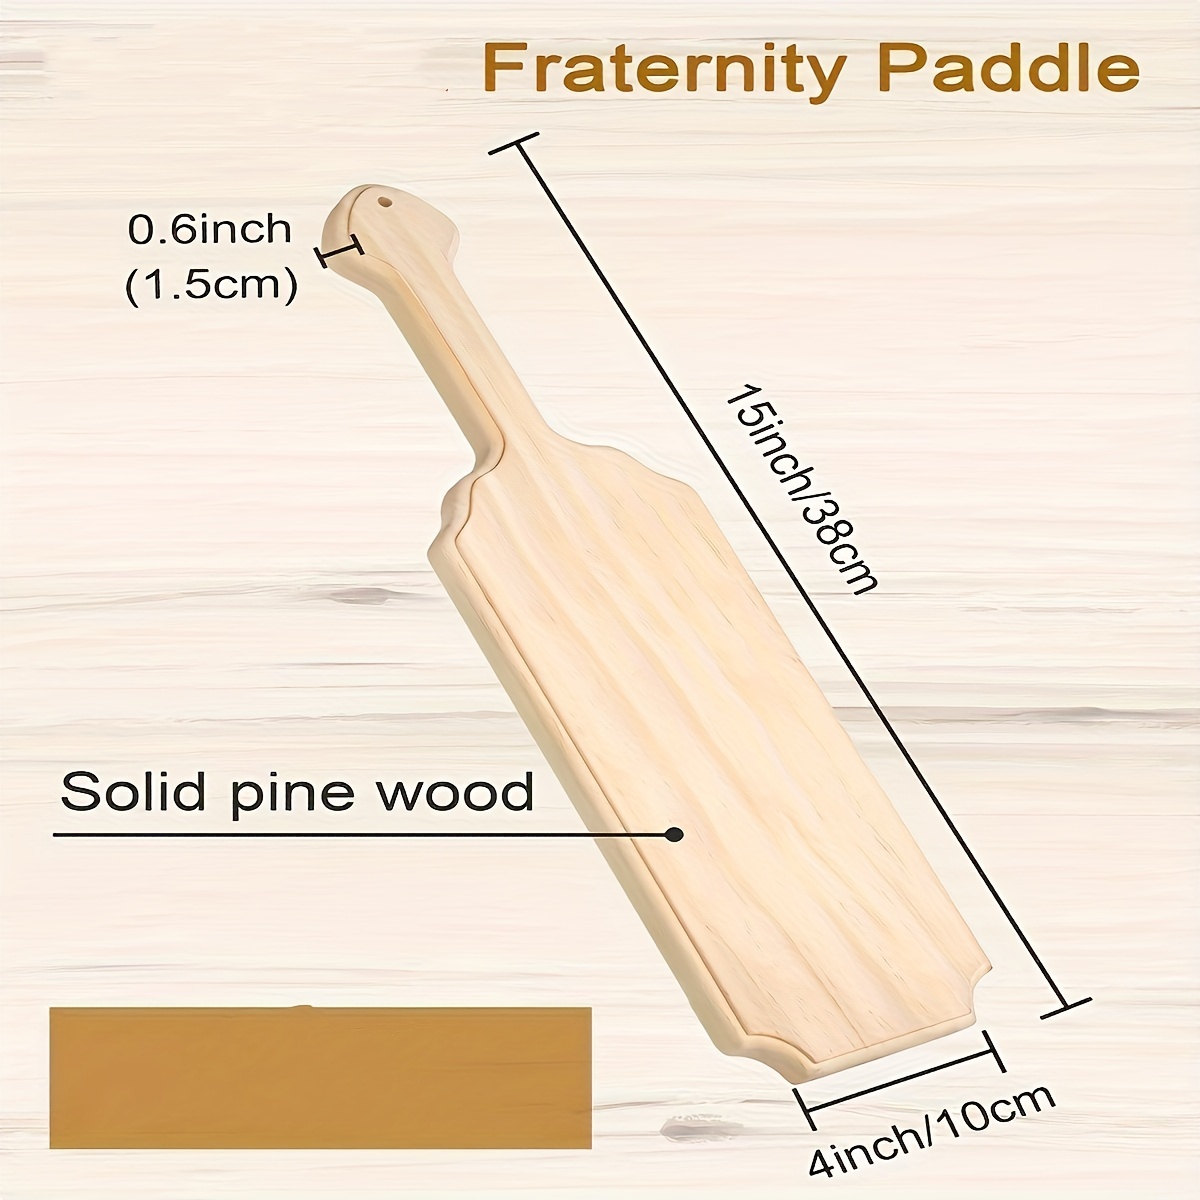 15 Inch Greek Fraternity Paddle Solid Sorority Wood Paddle